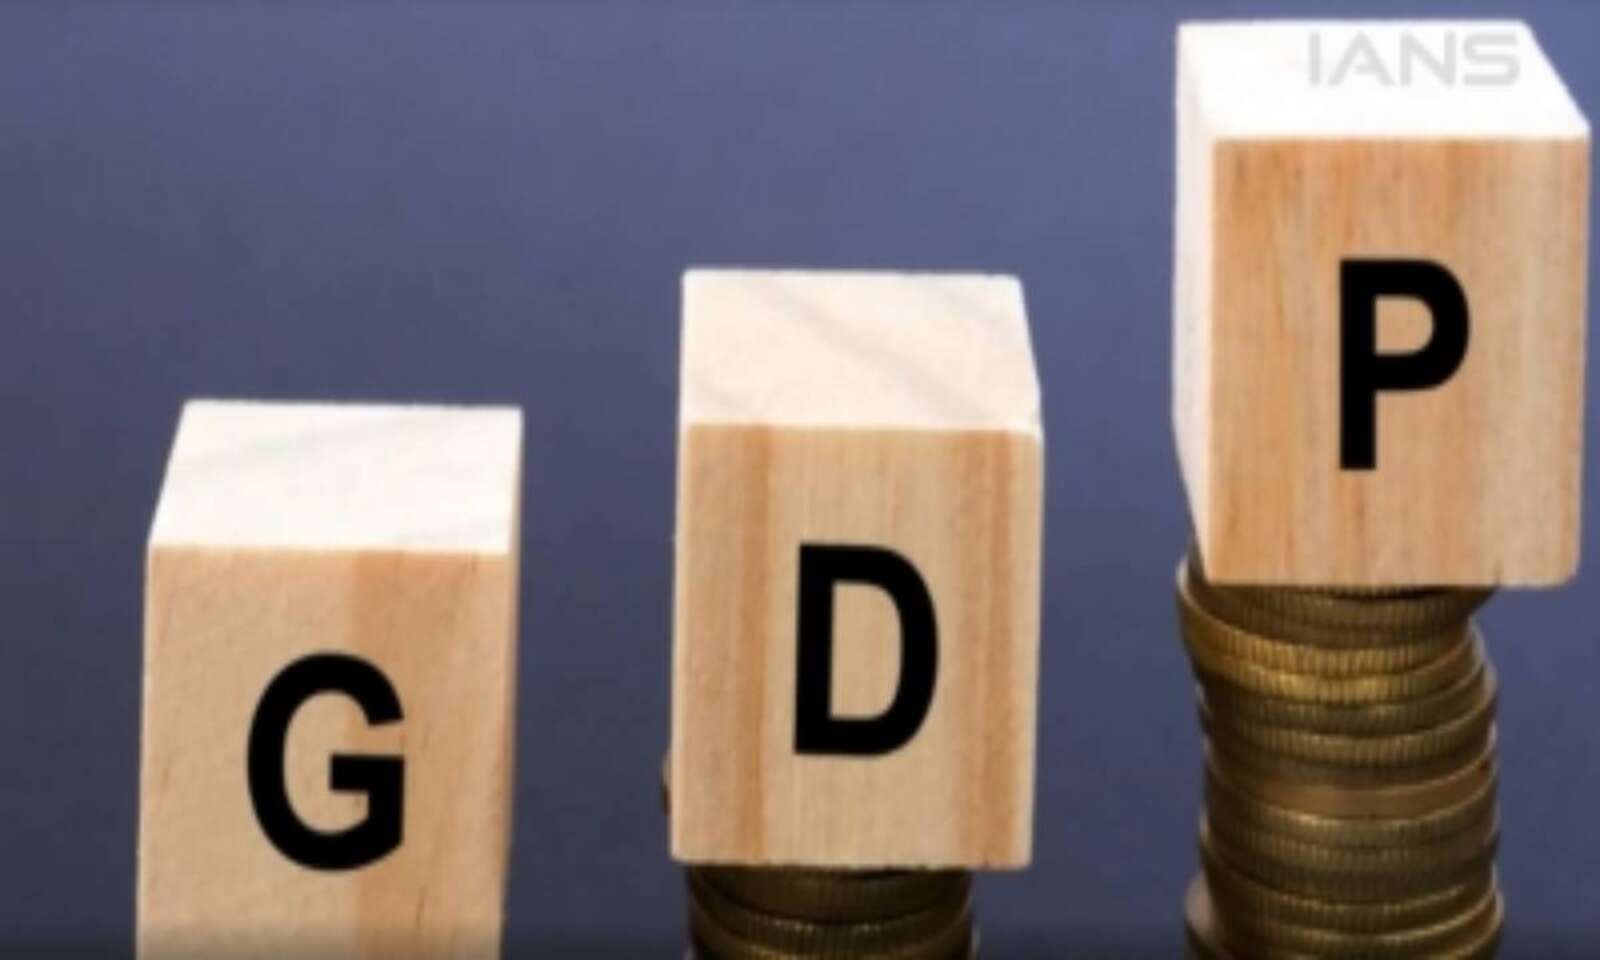 indias-gdp-growth-hits-72-per-cent-for-fiscal-year-2022-23-after-better-than-expected-performance-in-fourth-quarter